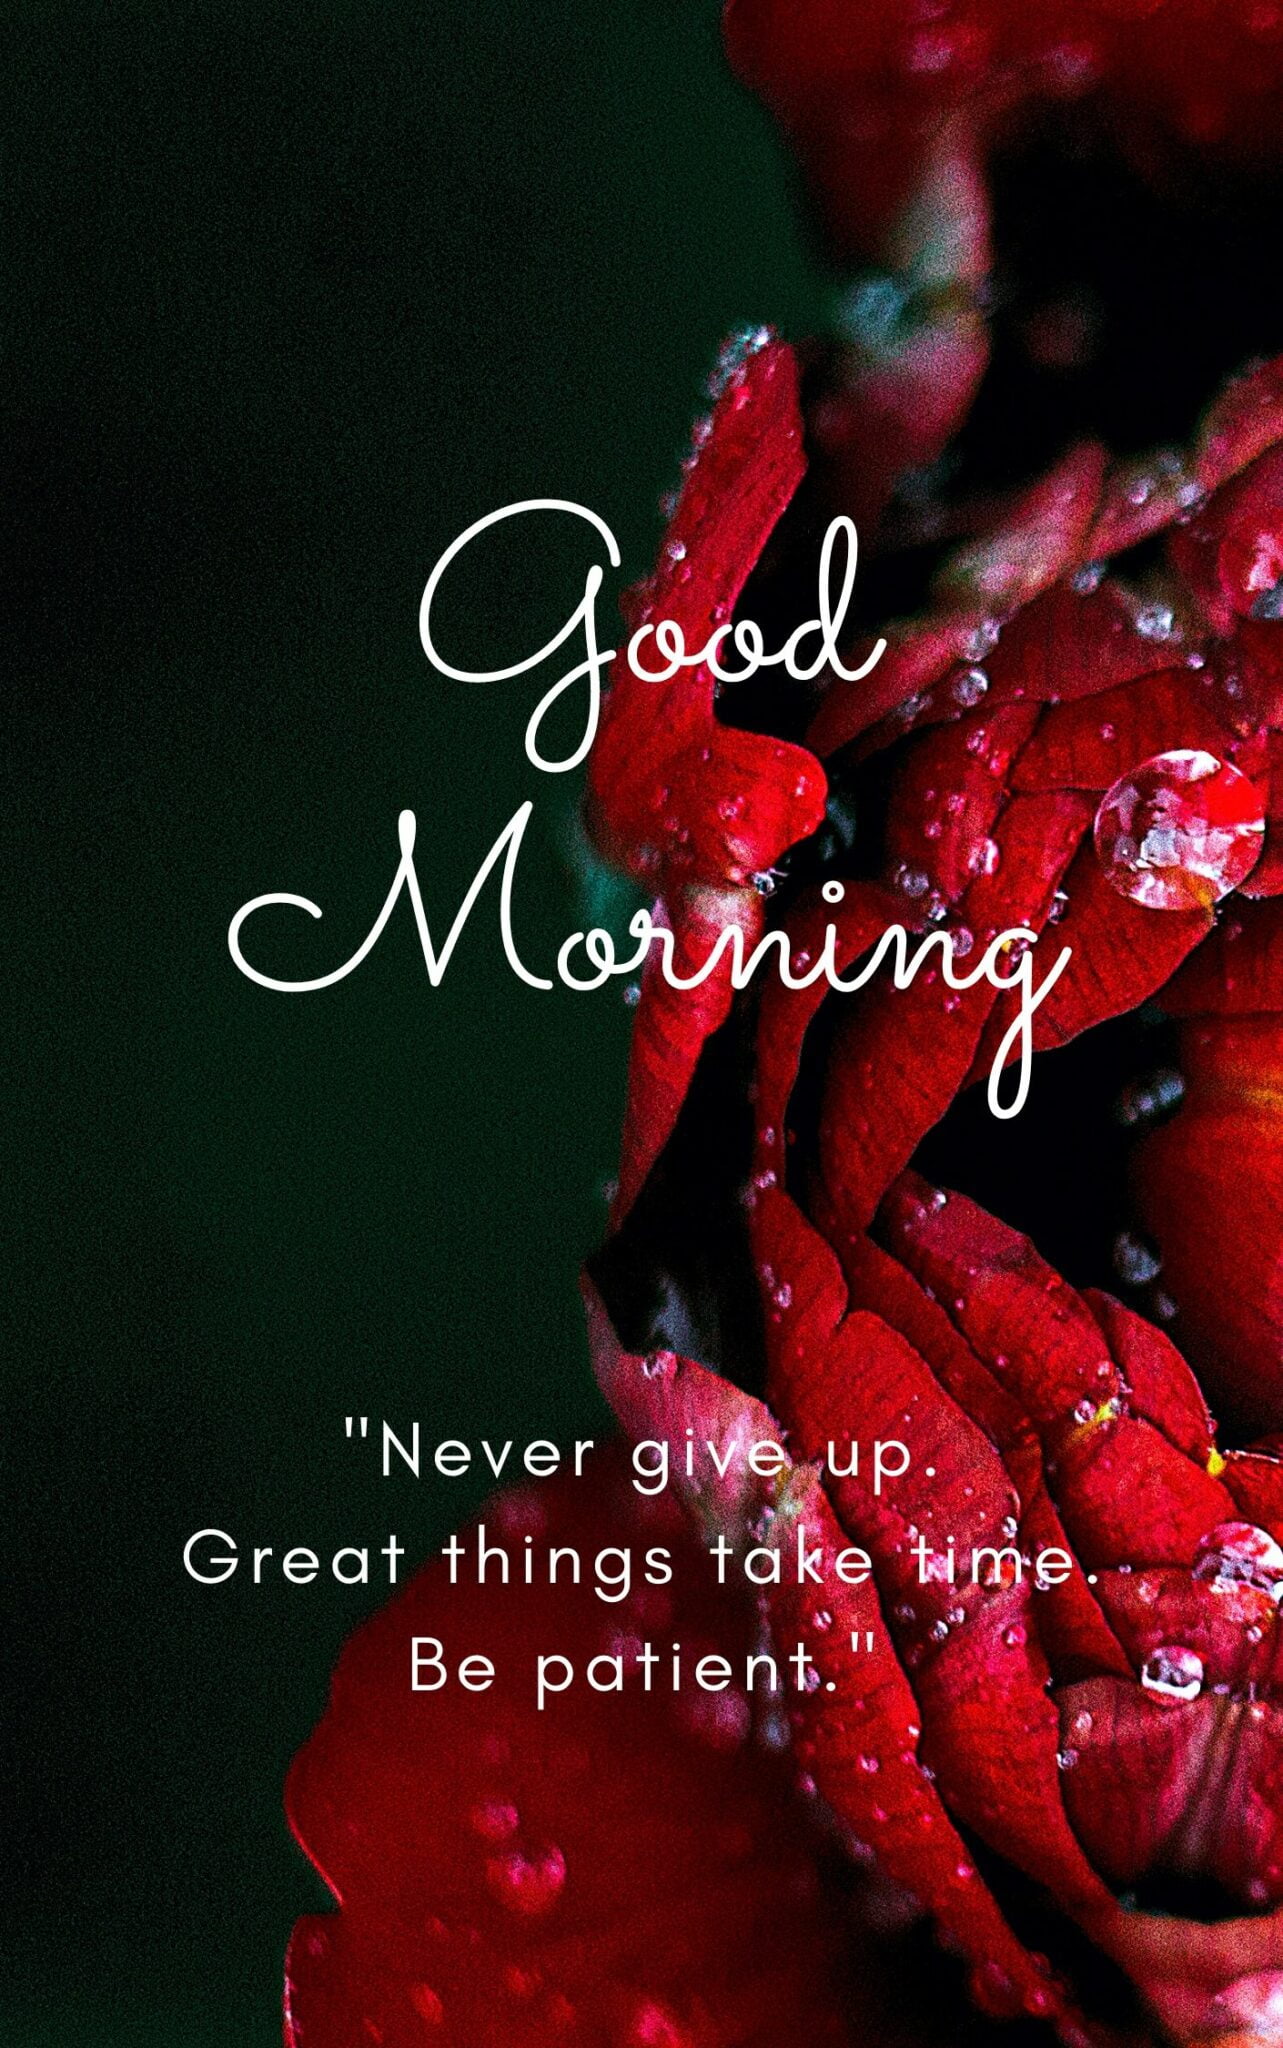 Good Morning Image with Flower and quote. Never Give up. Great things take time